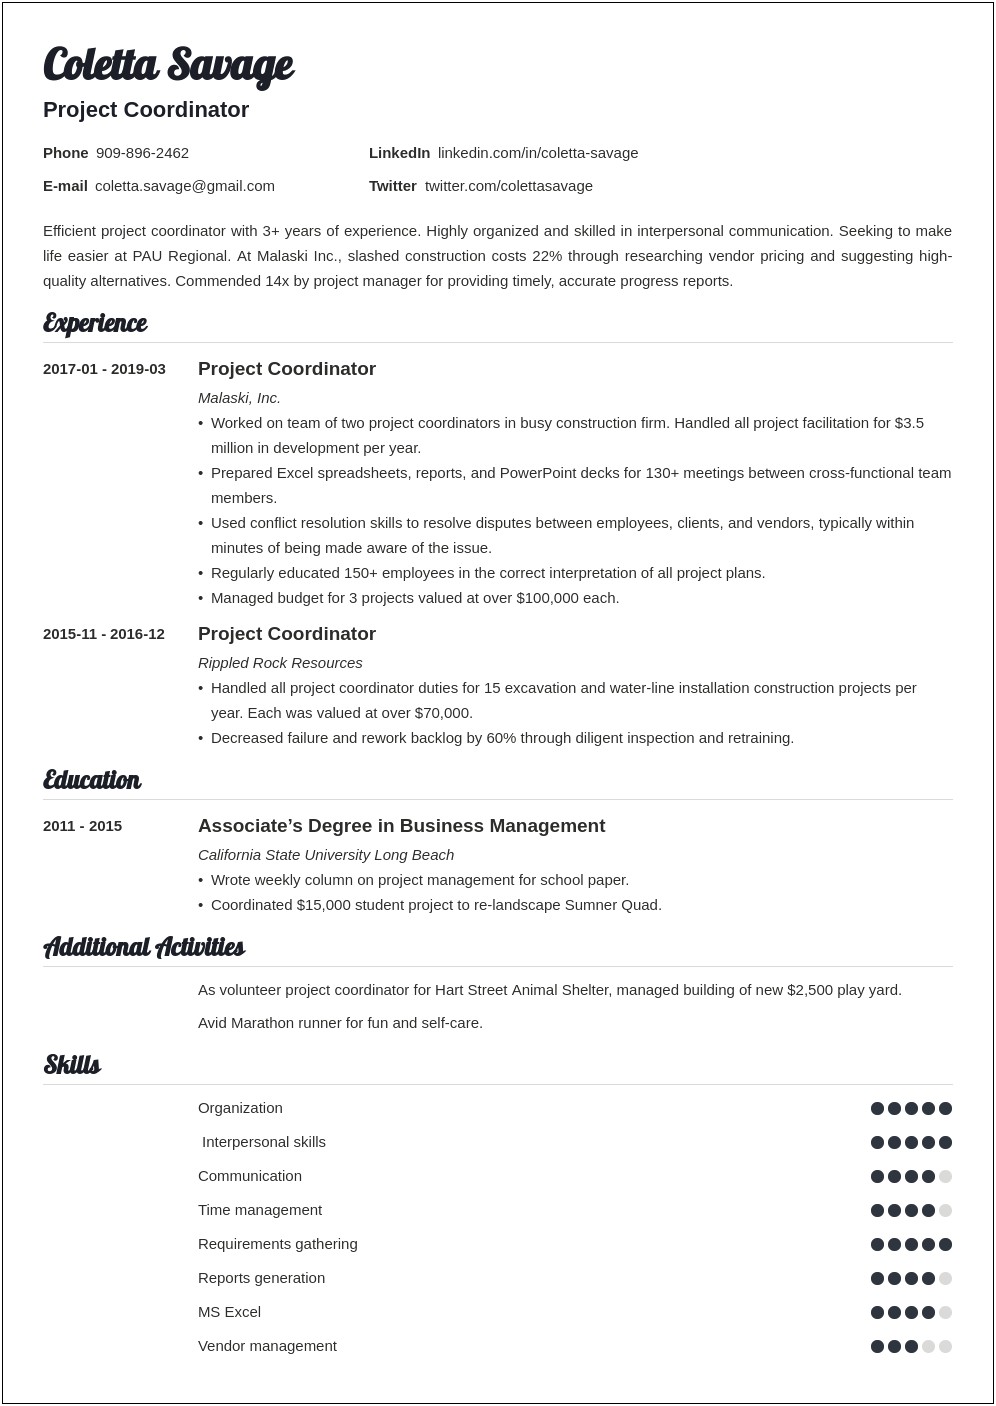 Resume Objective Examples Project Coordinator